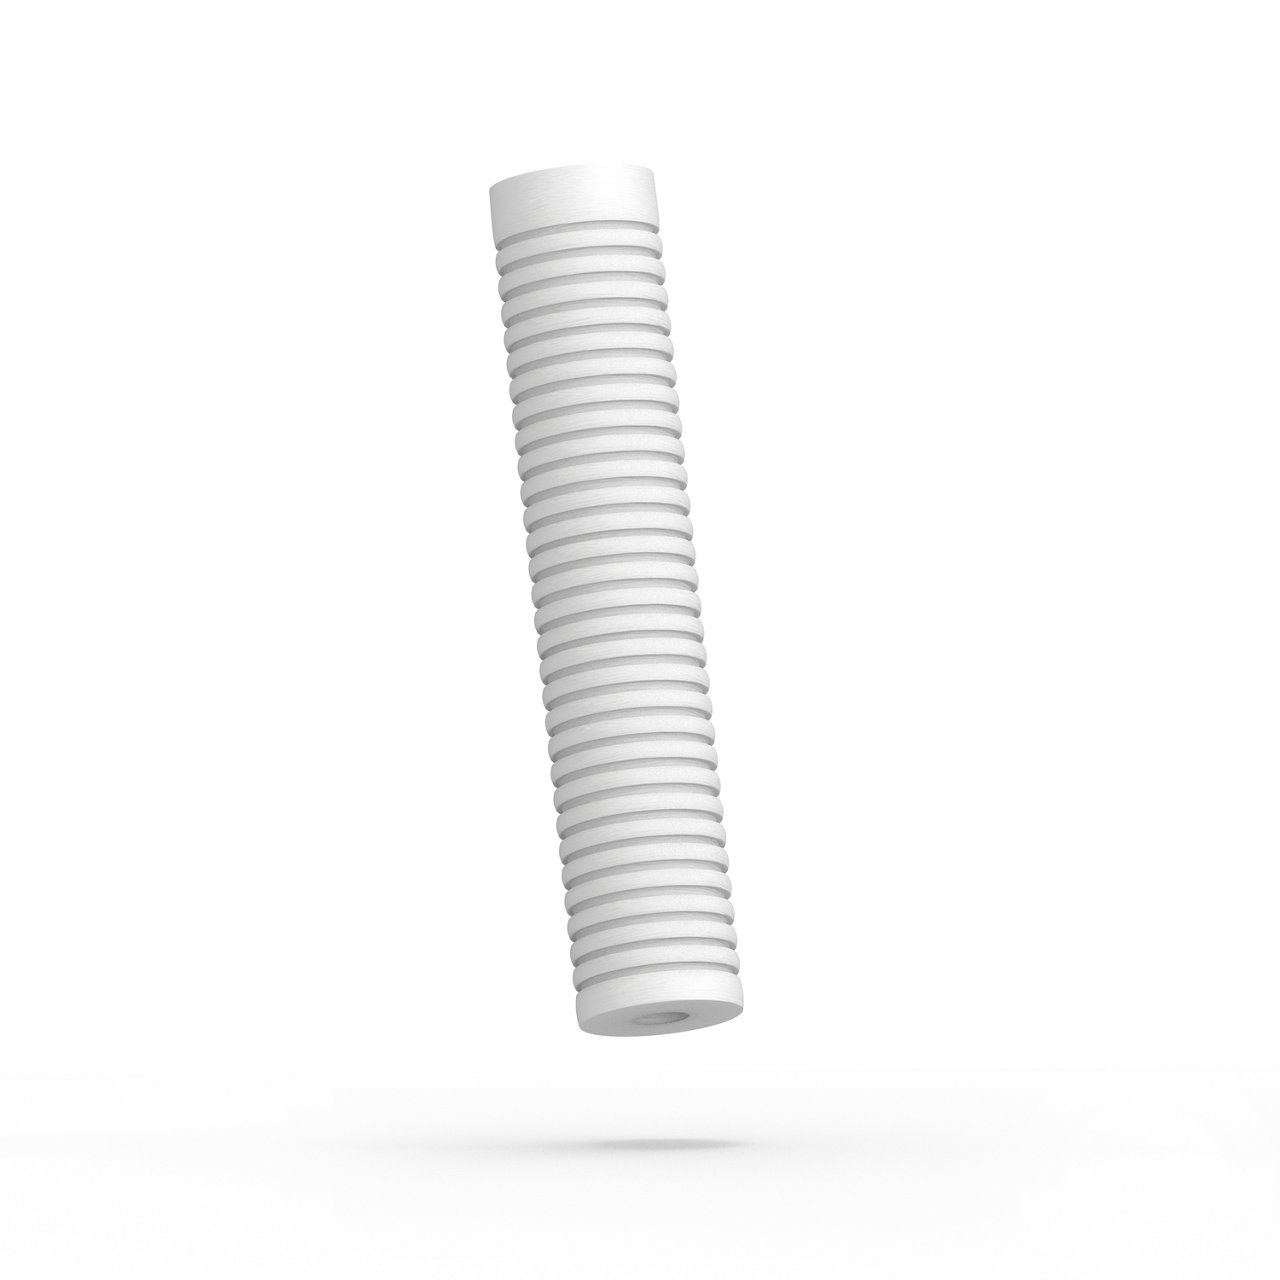 Rendered image of the 3M� Micro-Klean RT Series Filter Cartridge from a 3/4 view